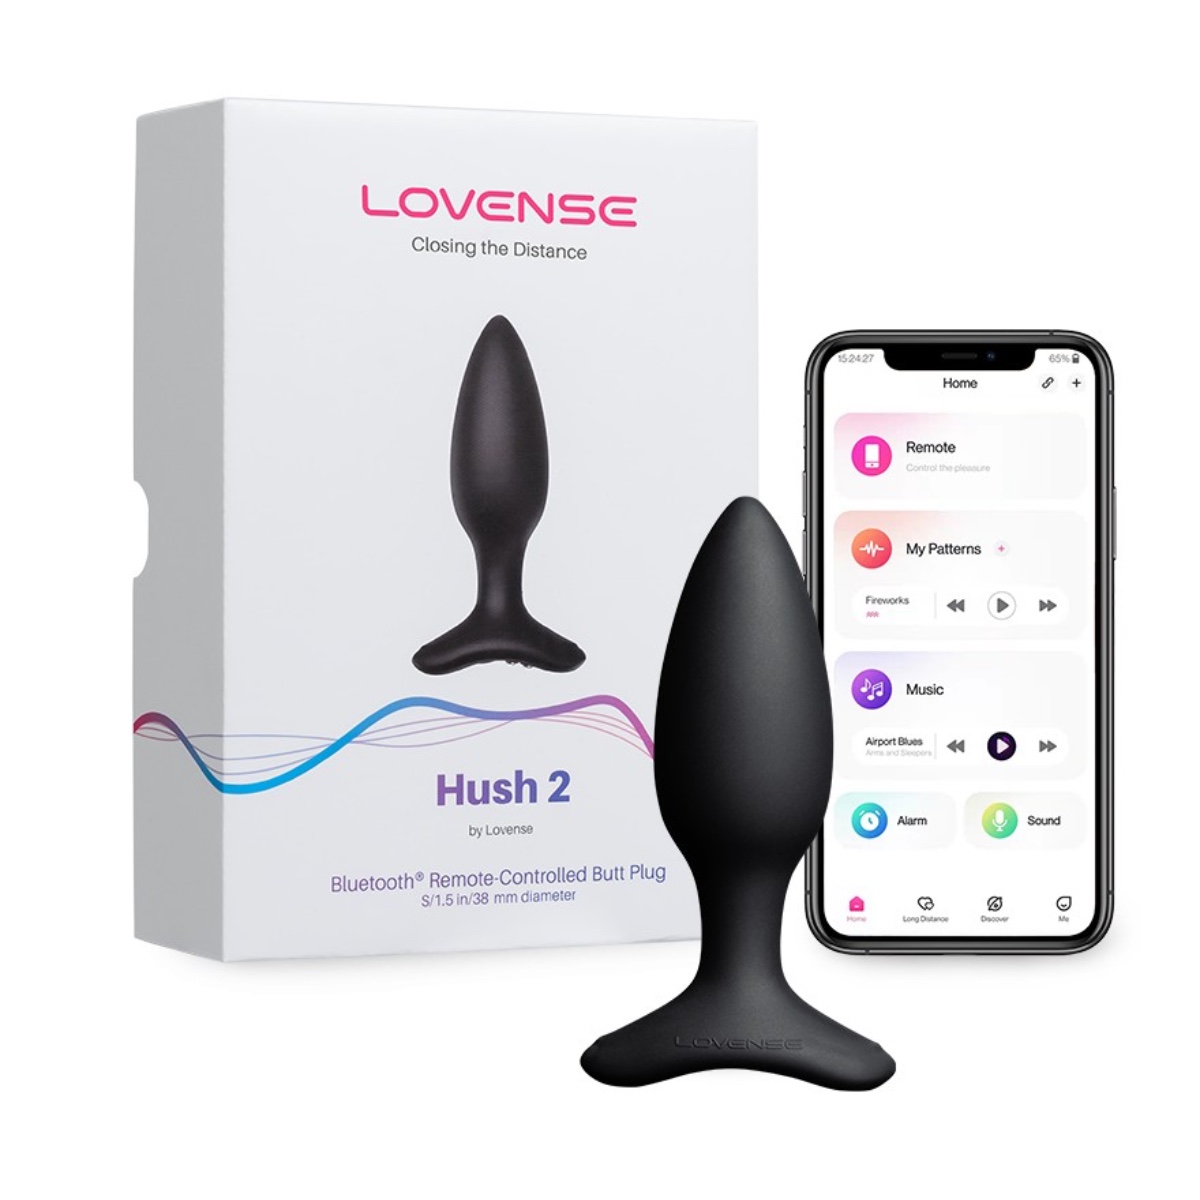 Lovense Hush 2 Review - Is this the Best Butt Plug Yet? - Interactive Vibrating Butt Plug